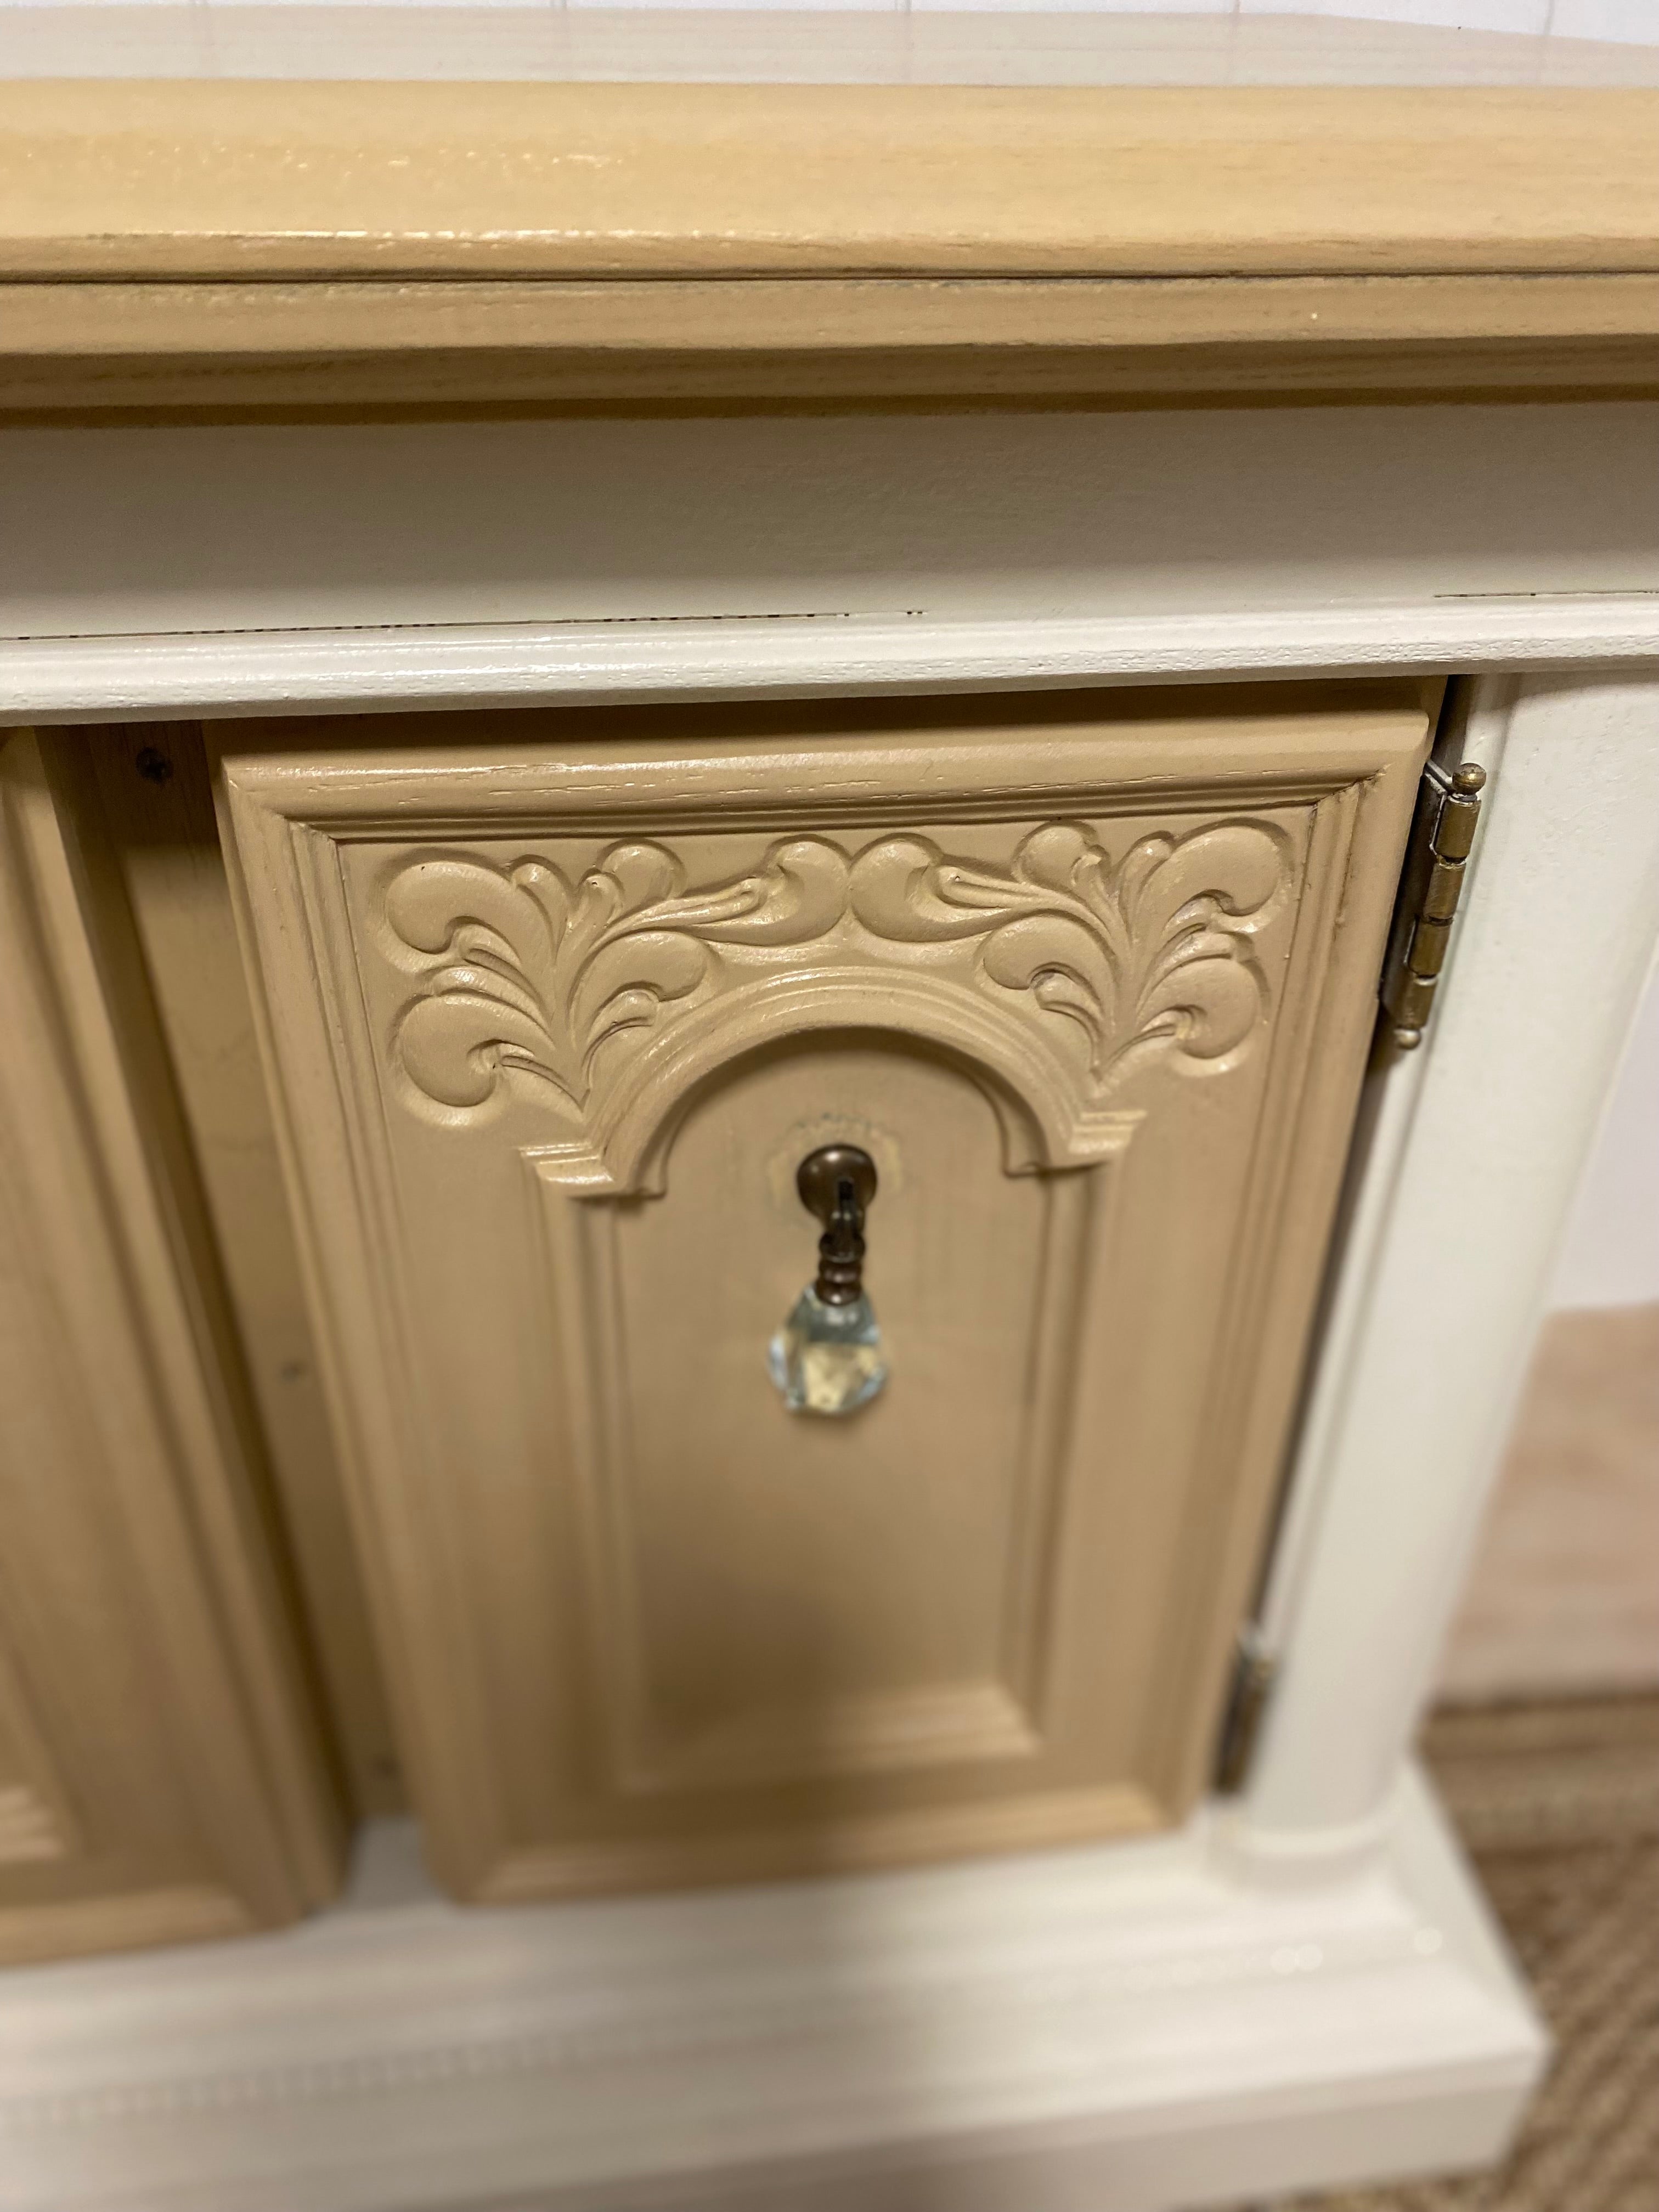 Vintage Refinished Accent Cabinet with ornate detail / Nightstand